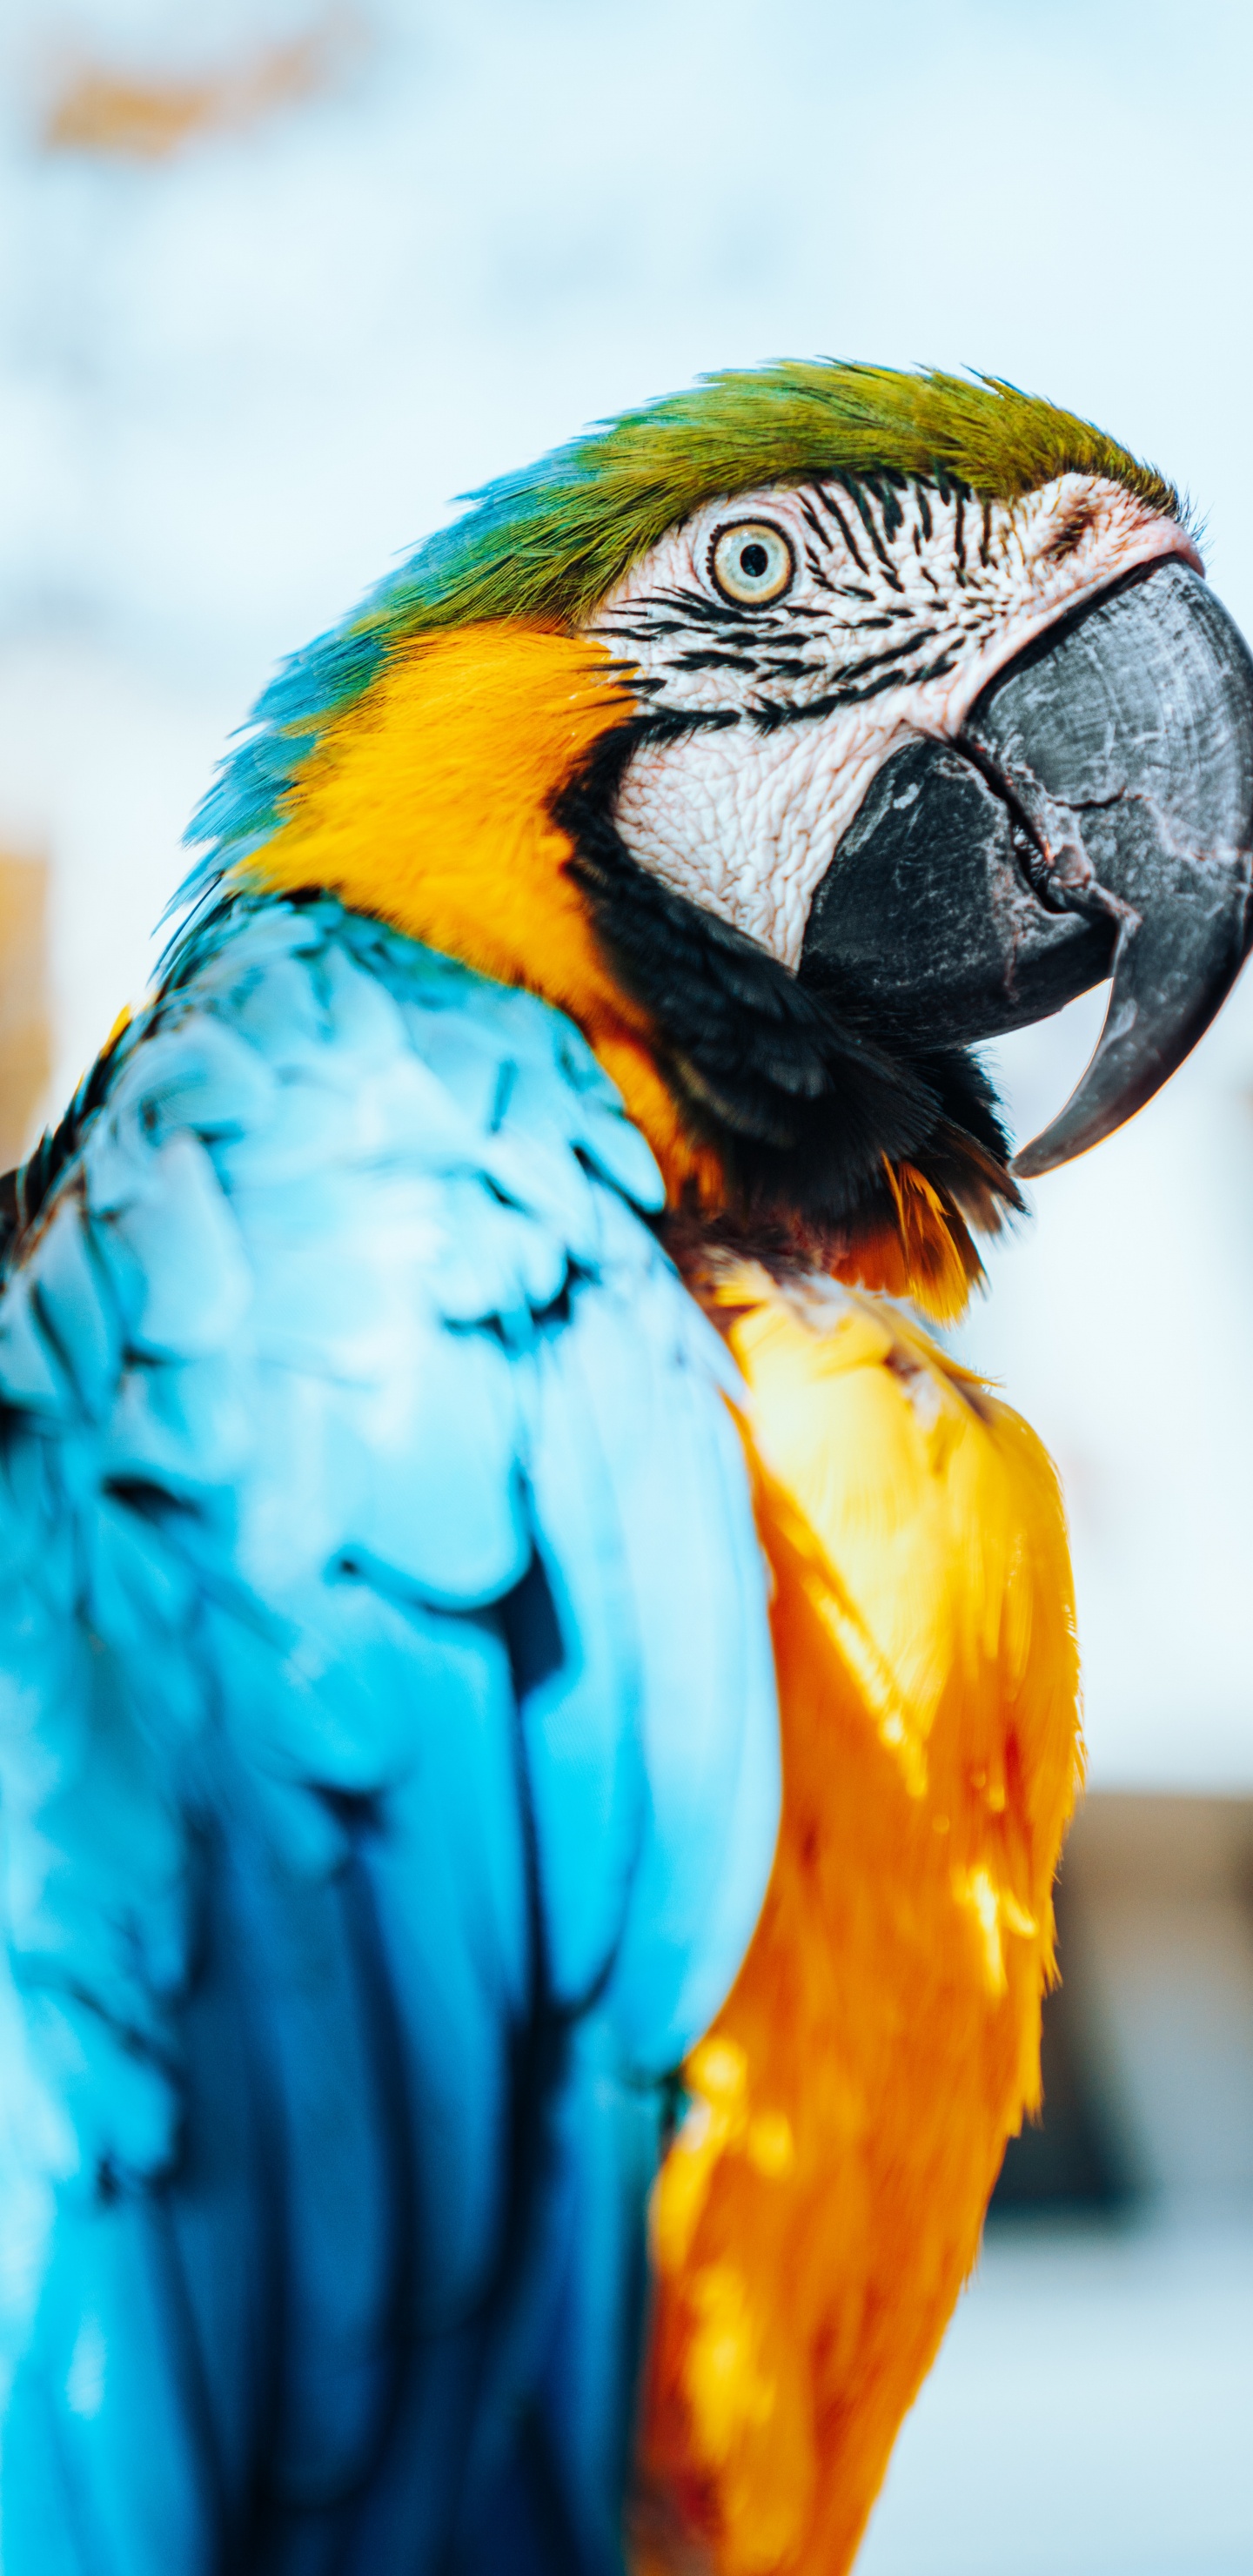 Blue Yellow and Orange Parrot. Wallpaper in 1440x2960 Resolution